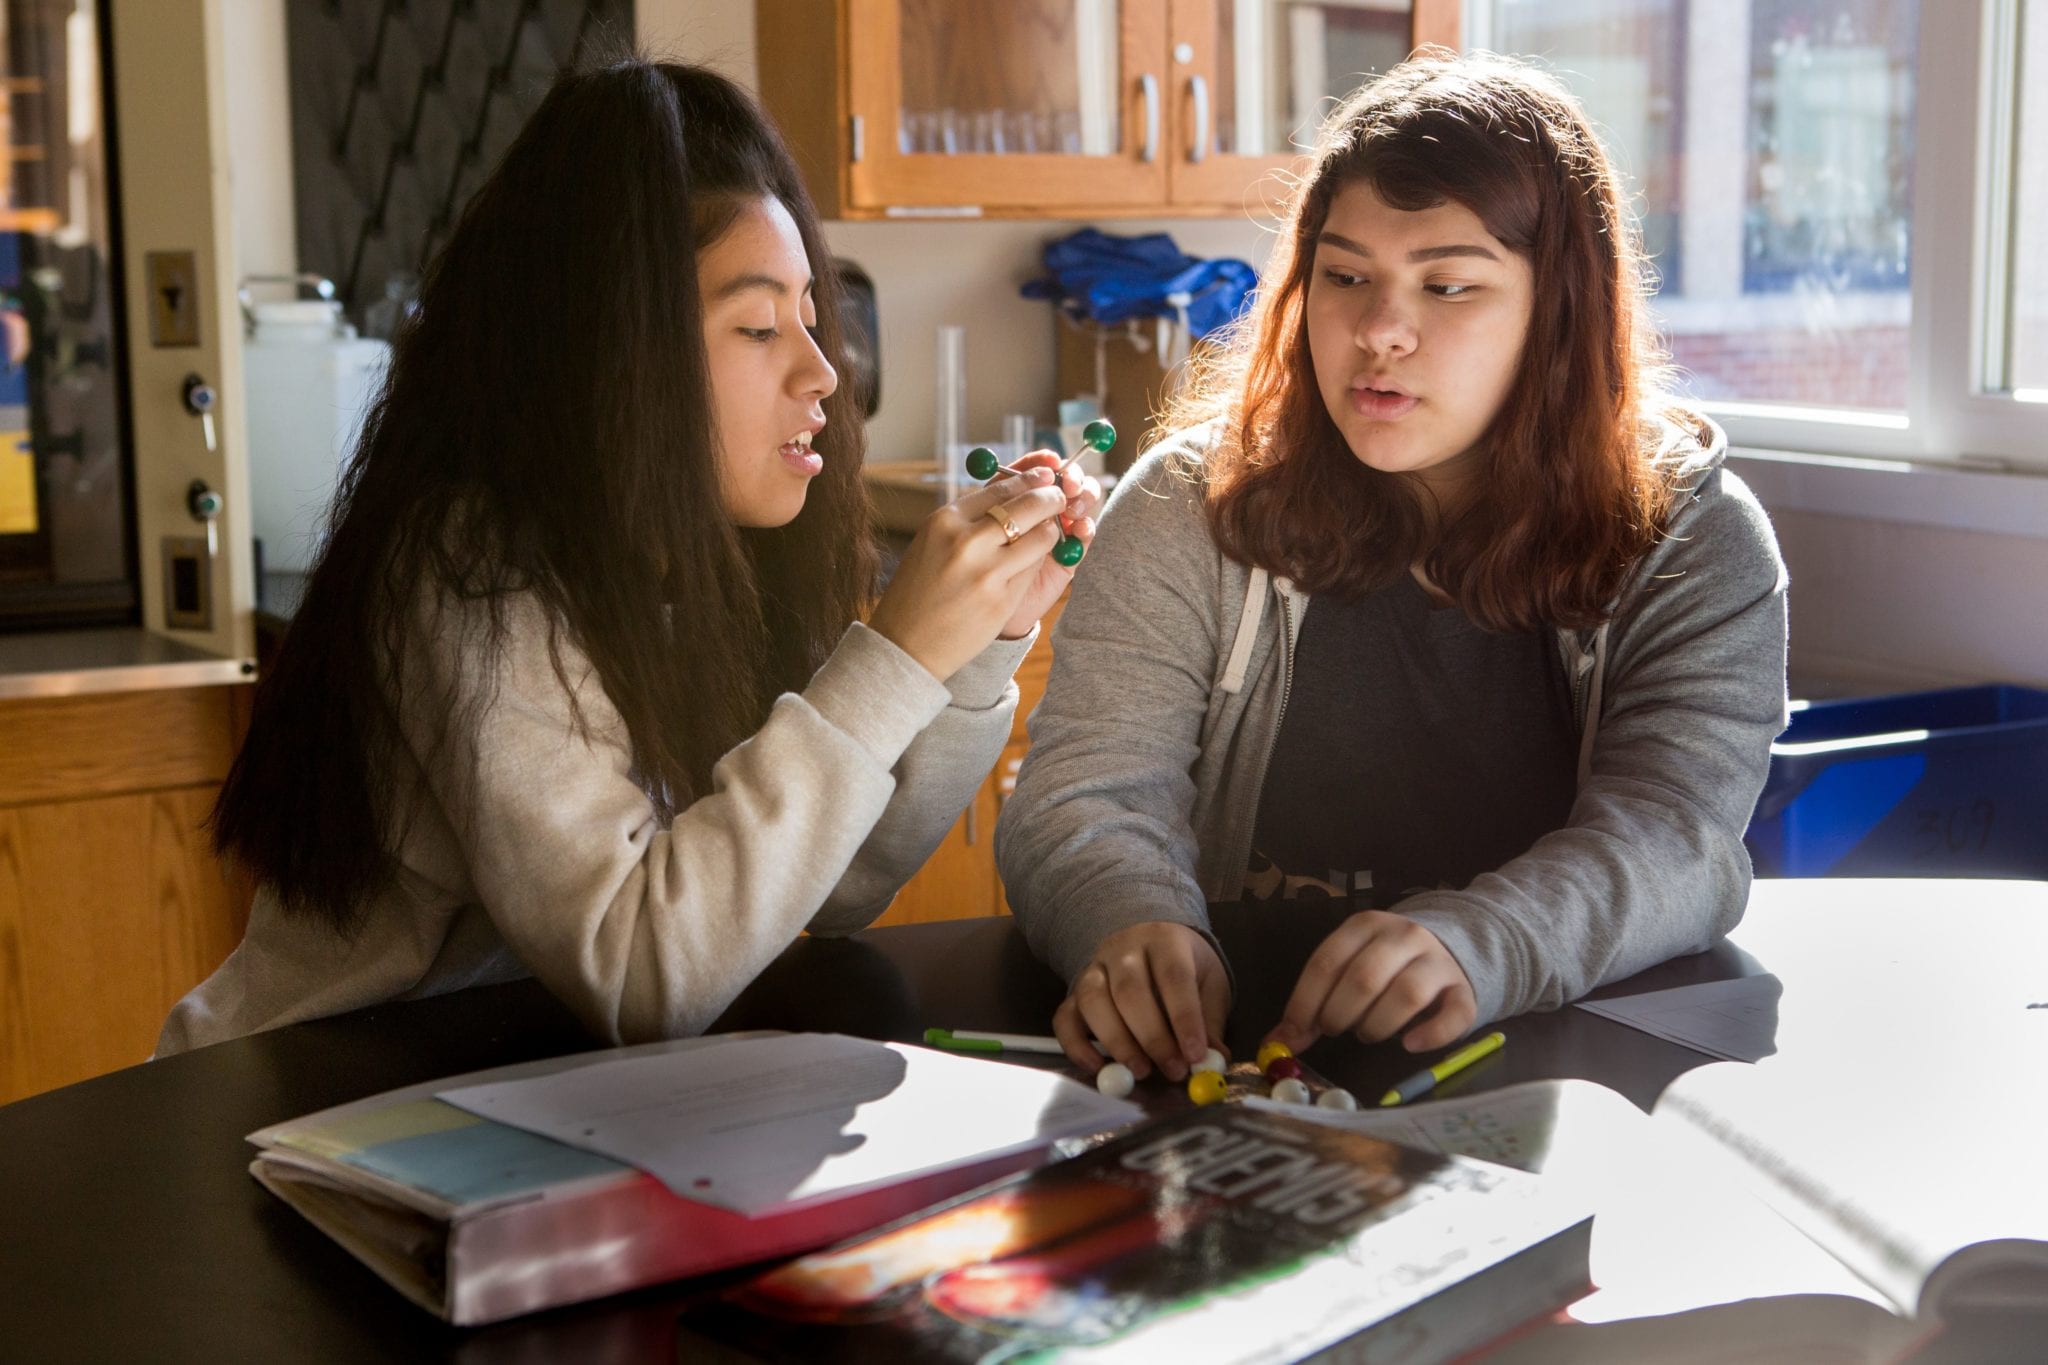 Two female students in a high school chemistry classroom working on a 3-D model